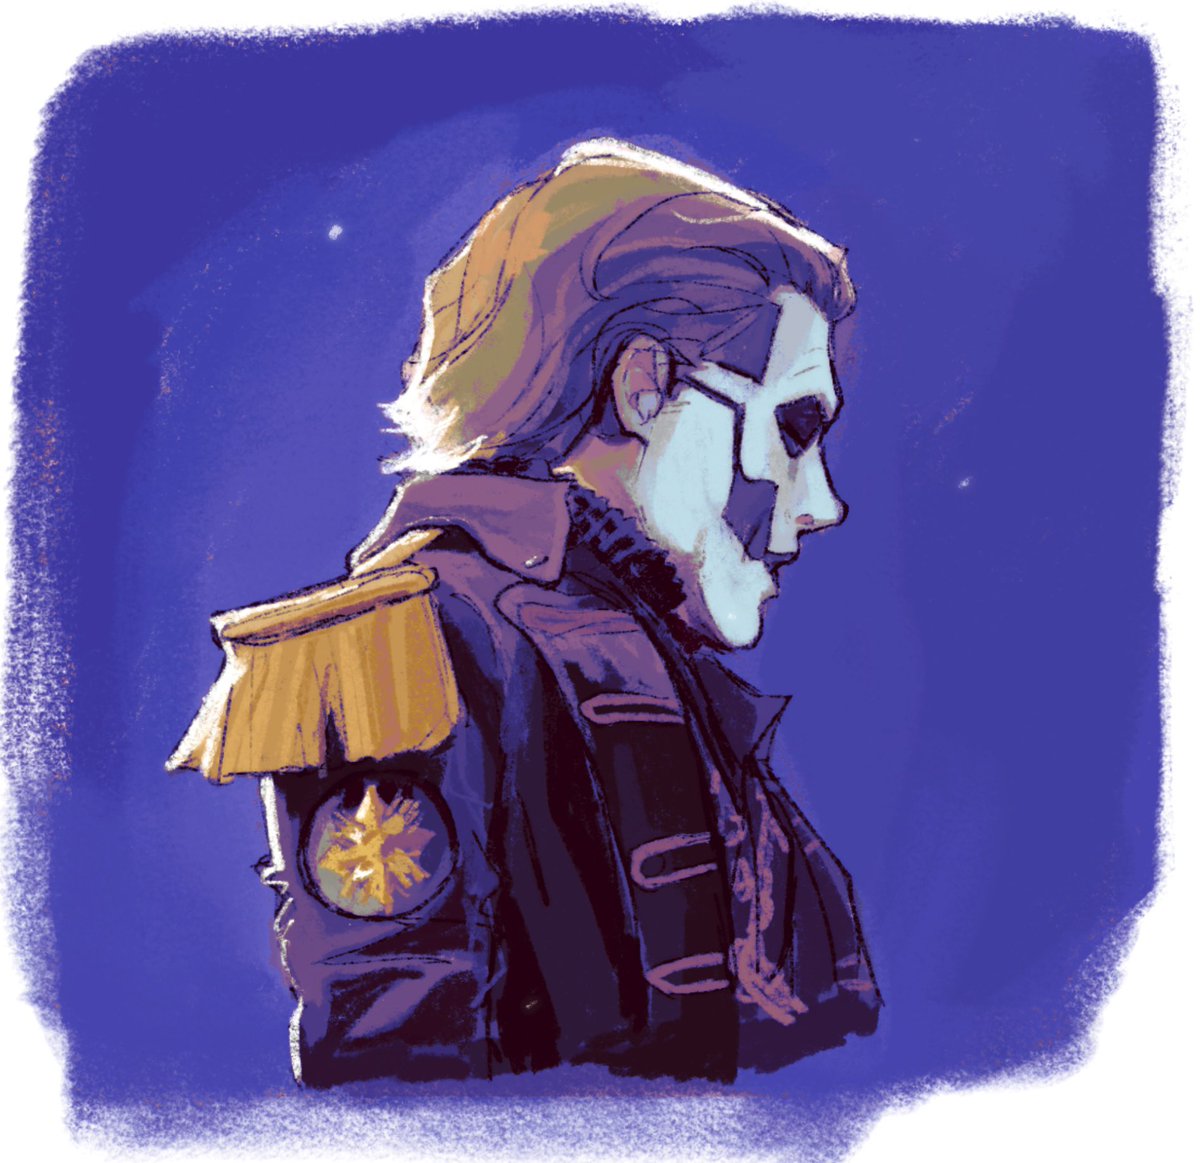 I have a special skill that turns company time into art of my wife 
#copia